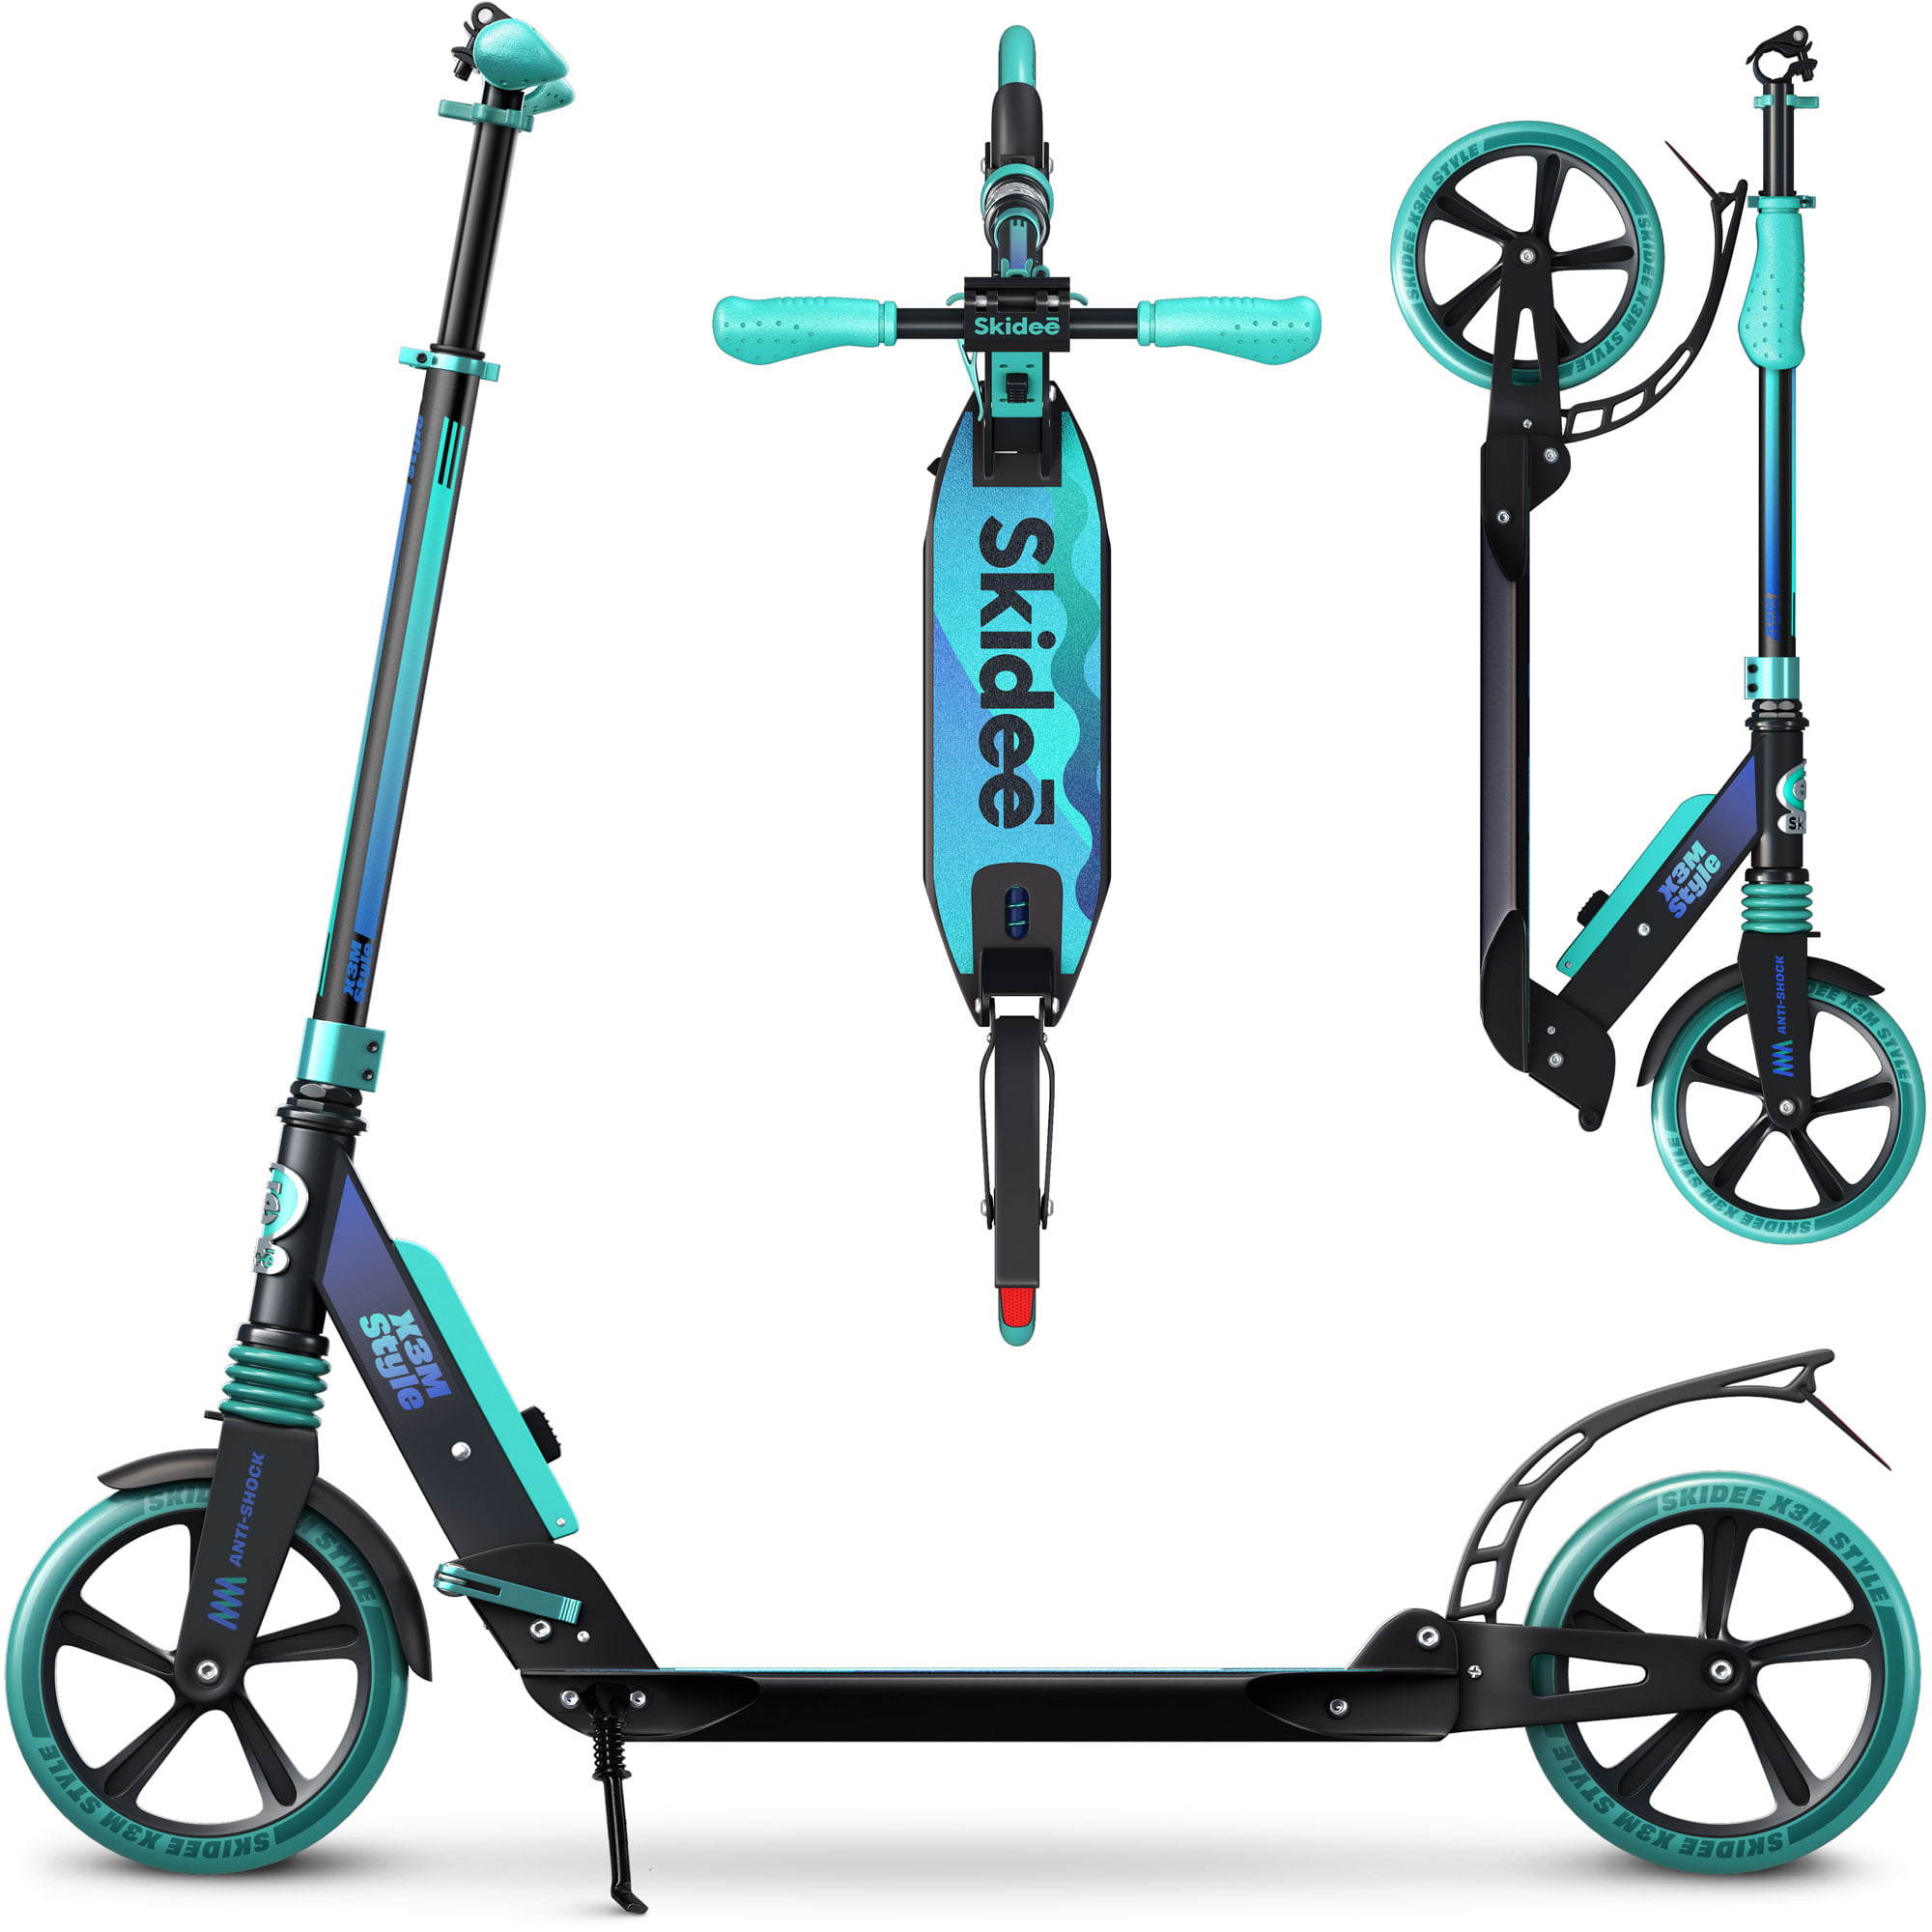 Scooter for Kids Ages 6-12 Scooter for Kids 8 Years and Up with 4 Adjustment Levels Handlebar Up to 41 Inches High Scooters for Teens 12 Years and Up Adult Scooter with Anti-Shock Suspension 